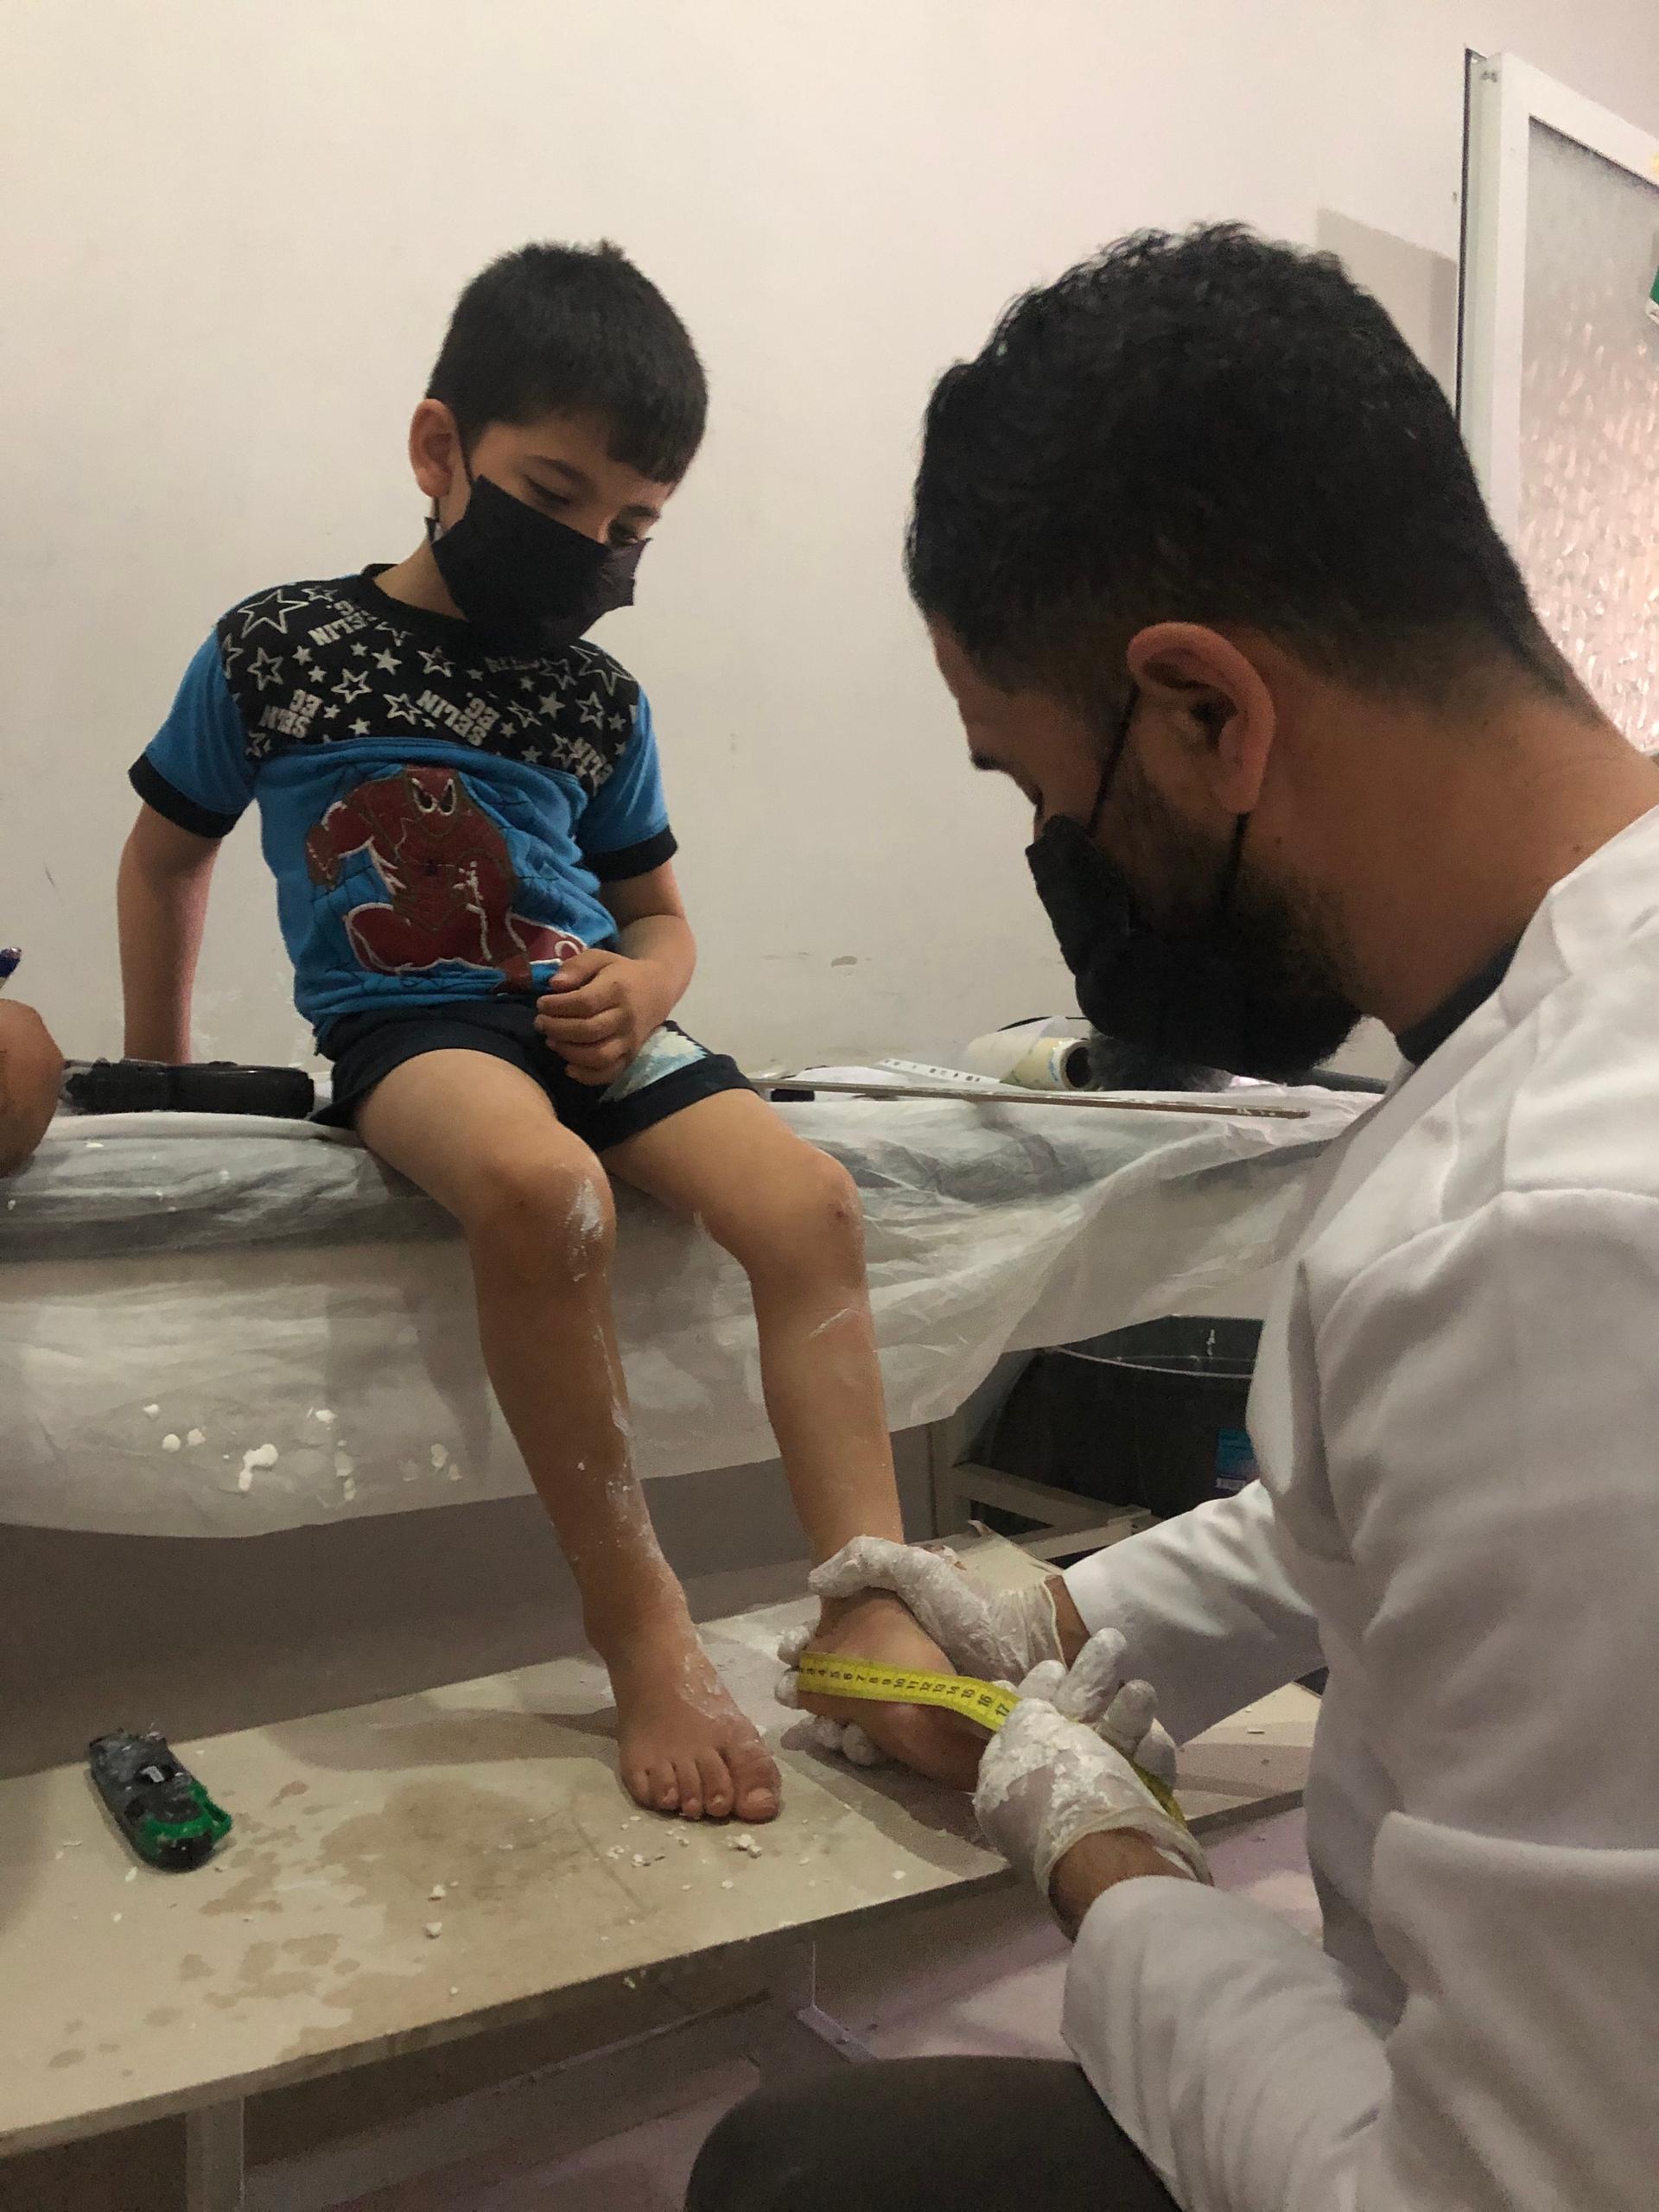 Five-year-old Jad al-Aweis suffers from cerebral palsy due to lack of oxygen at birth. Here, a specialist at a prosthetic limbs center in Turkey takes measurements of his legs so he can make braces that will help Jad walk.